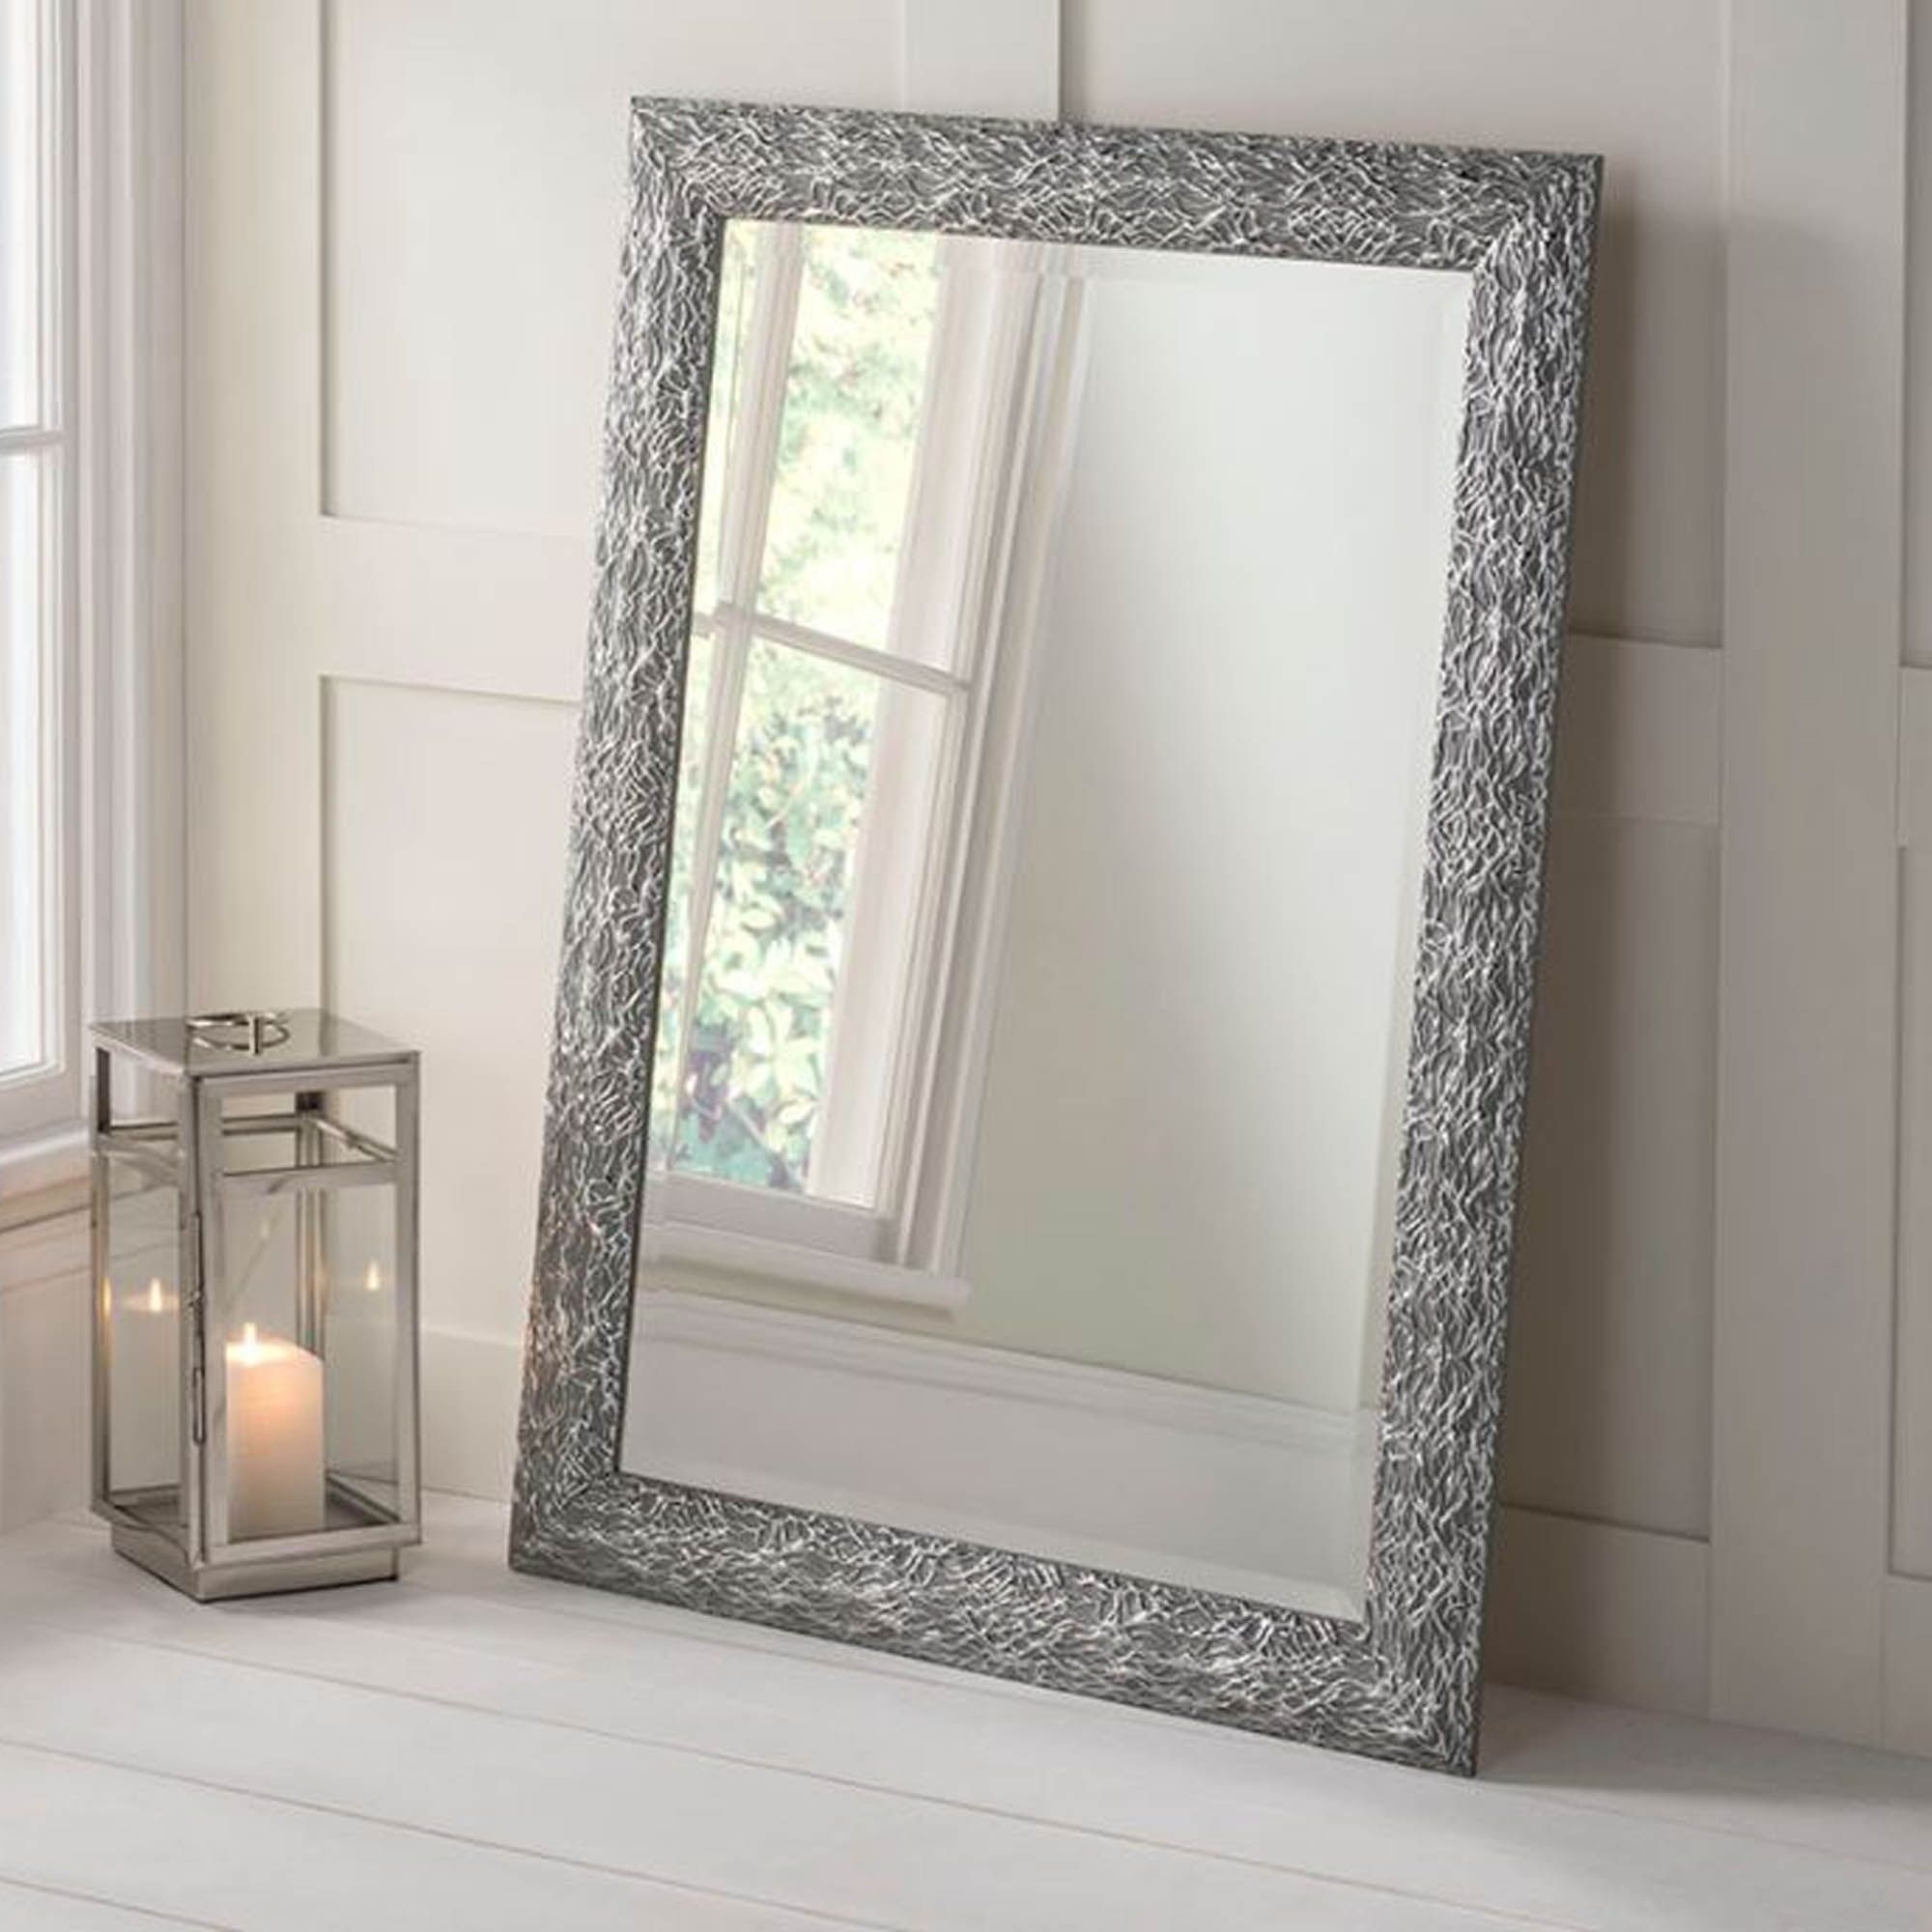 Detailed Rectangular Grey And Silver Wall Mirror | Hd365 With Modern Rectangle Wall Mirrors (View 13 of 15)